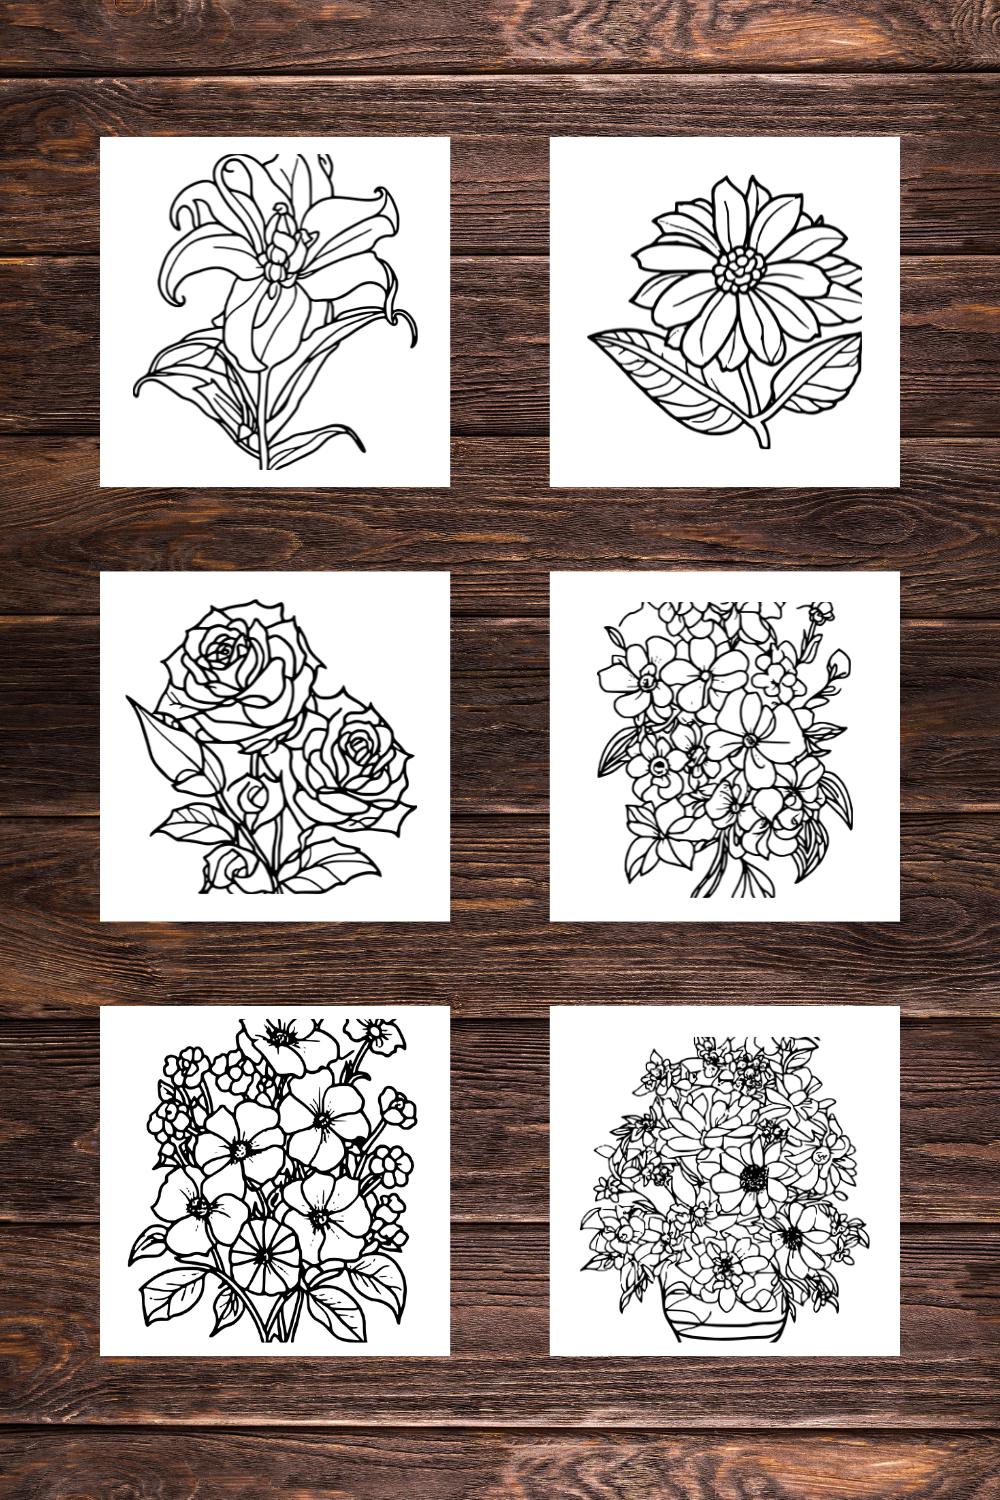 6 Floral Coloring Pages with For Adults (SVG and PNG) flower drawing sketch pinterest preview image.